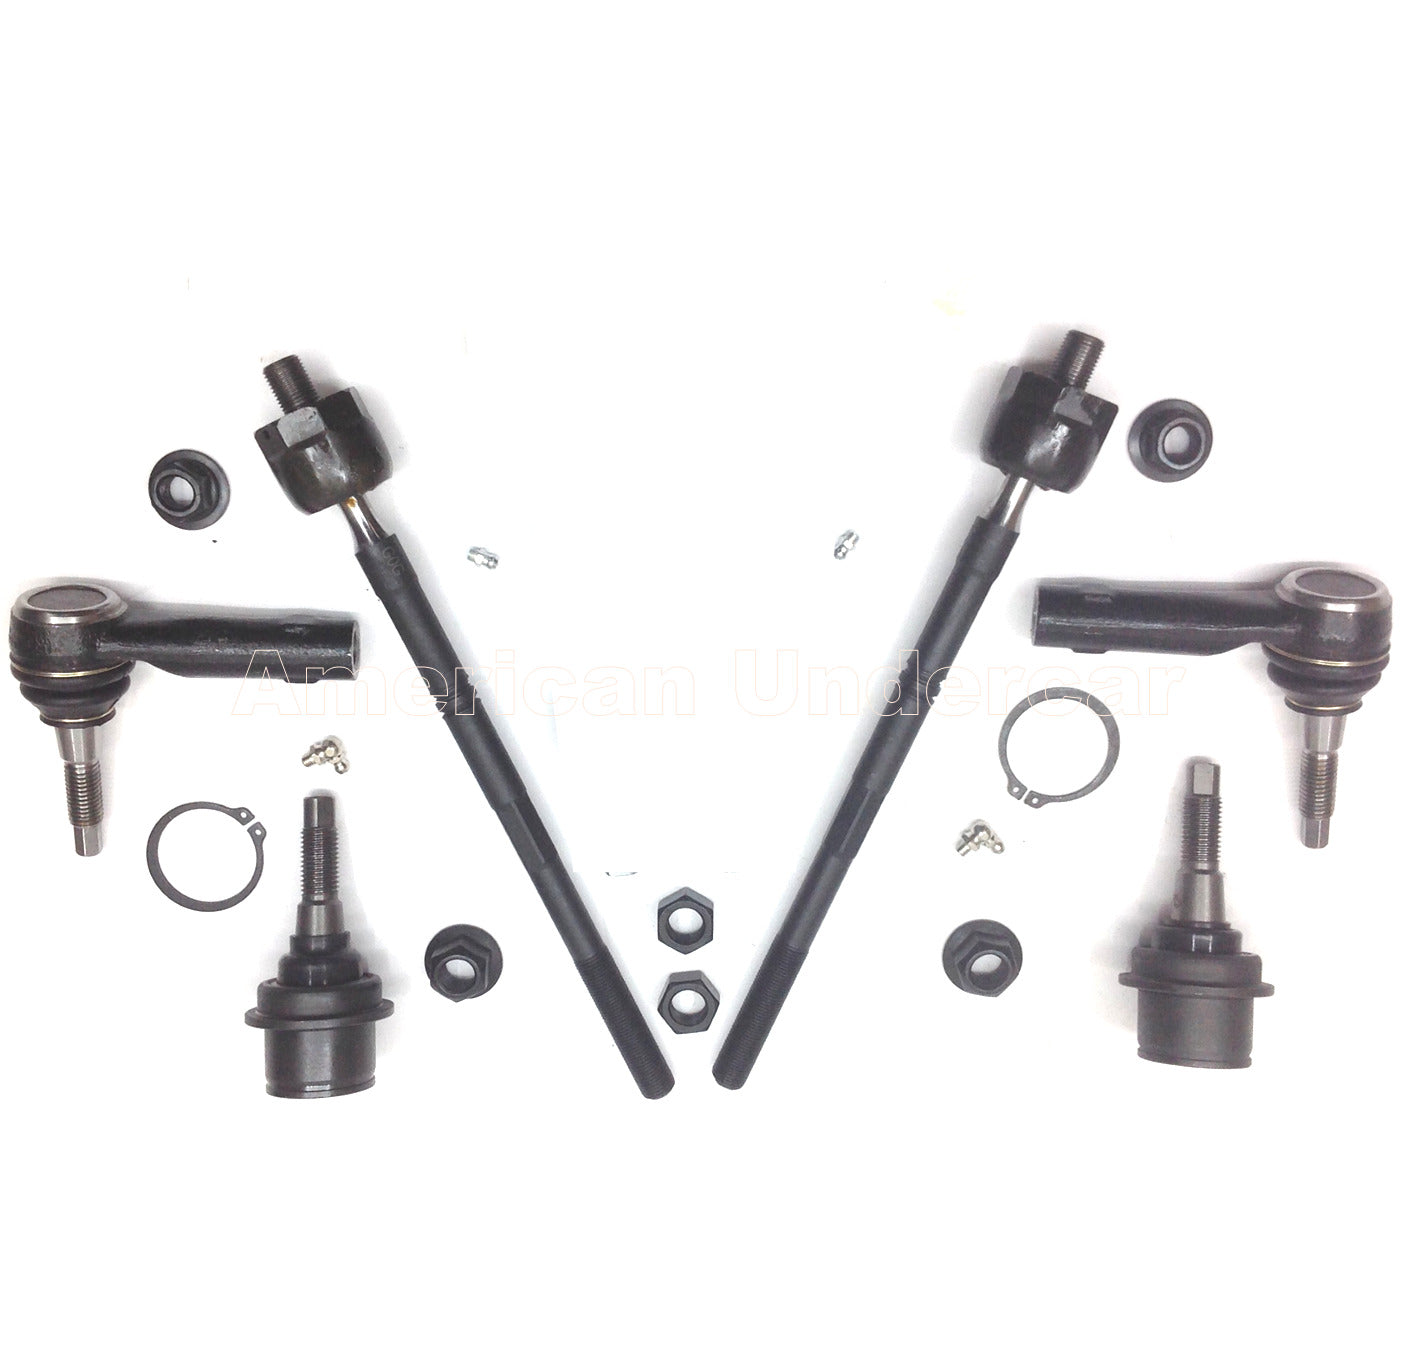 Lifetime Lower Ball Joints Tie Rod Steering Kit for 2007-2017 Ford Expedition 4x4